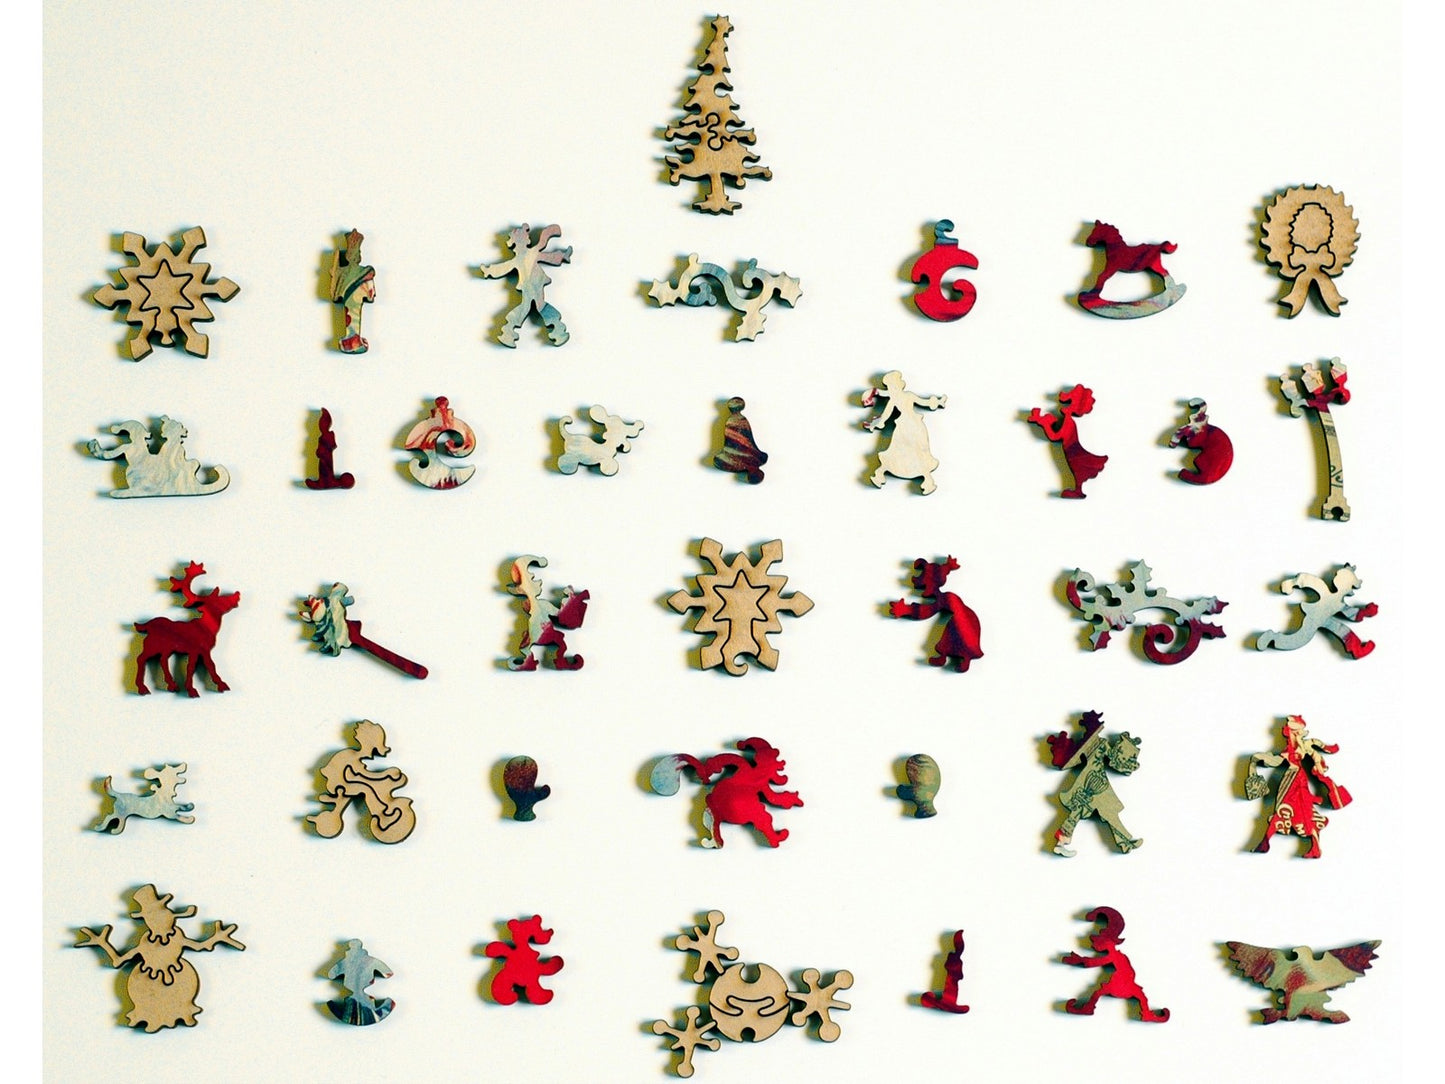 The whimsies that can be found in the puzzle, Morse's Santa.